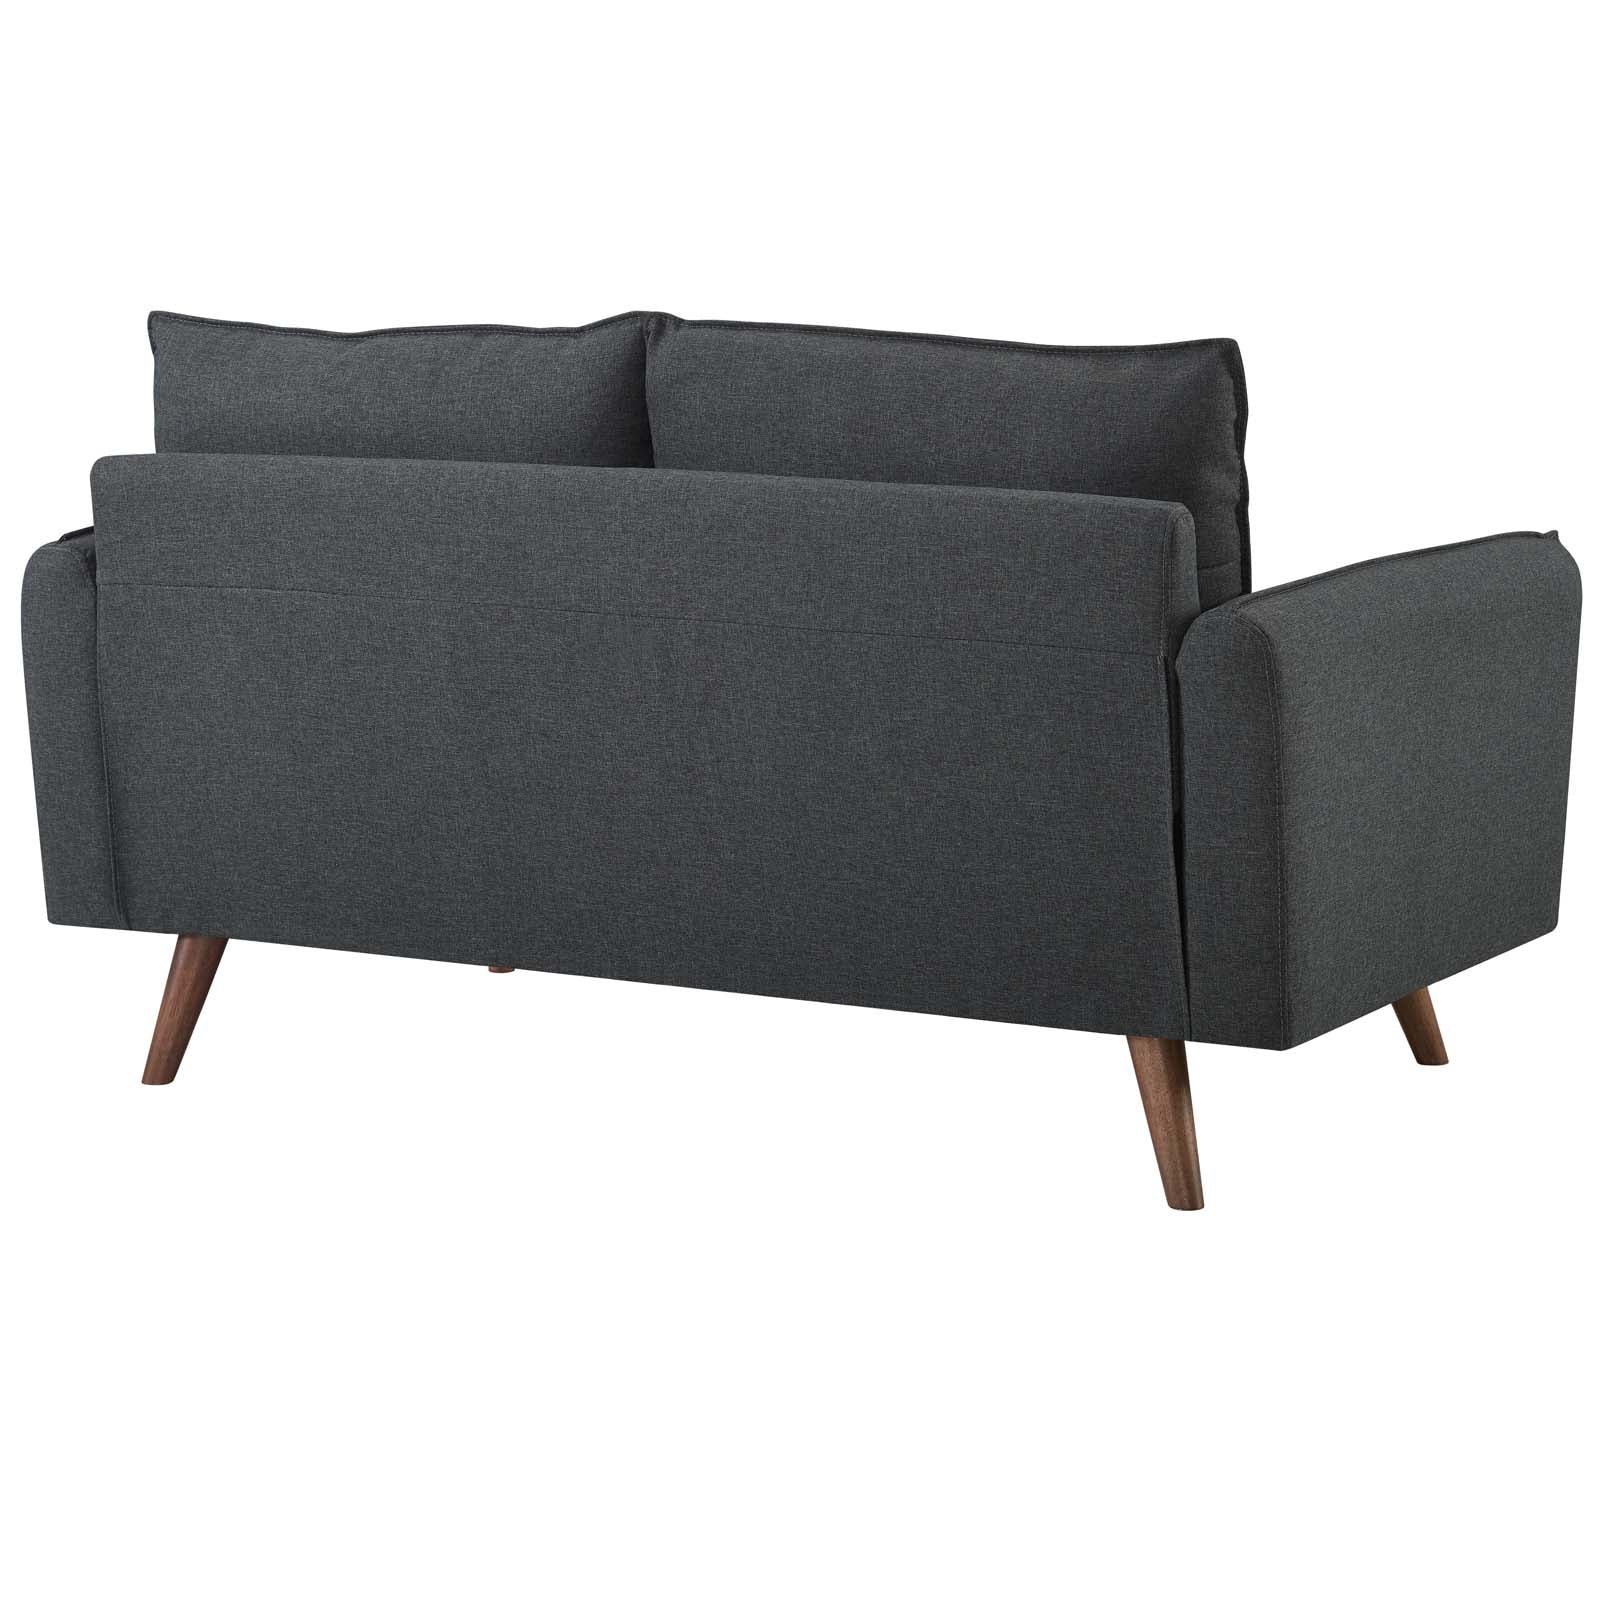 Modway Living Room Sets - Revive Upholstered Fabric Sofa and Loveseat Set Gray